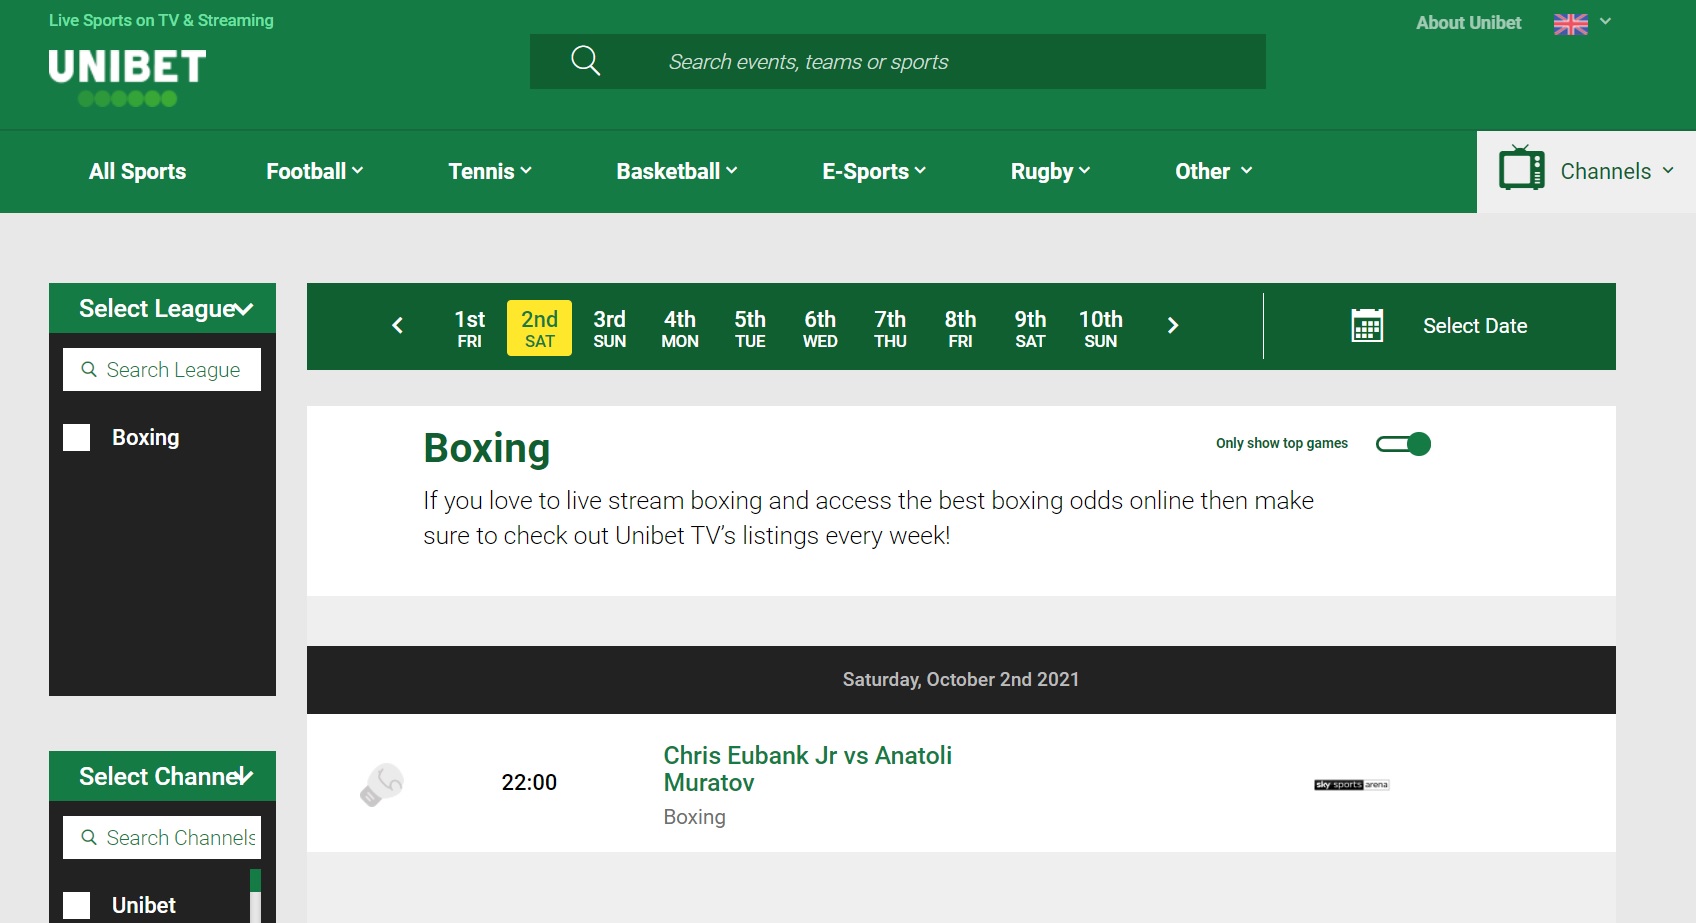 Unibet boxing streaming sites